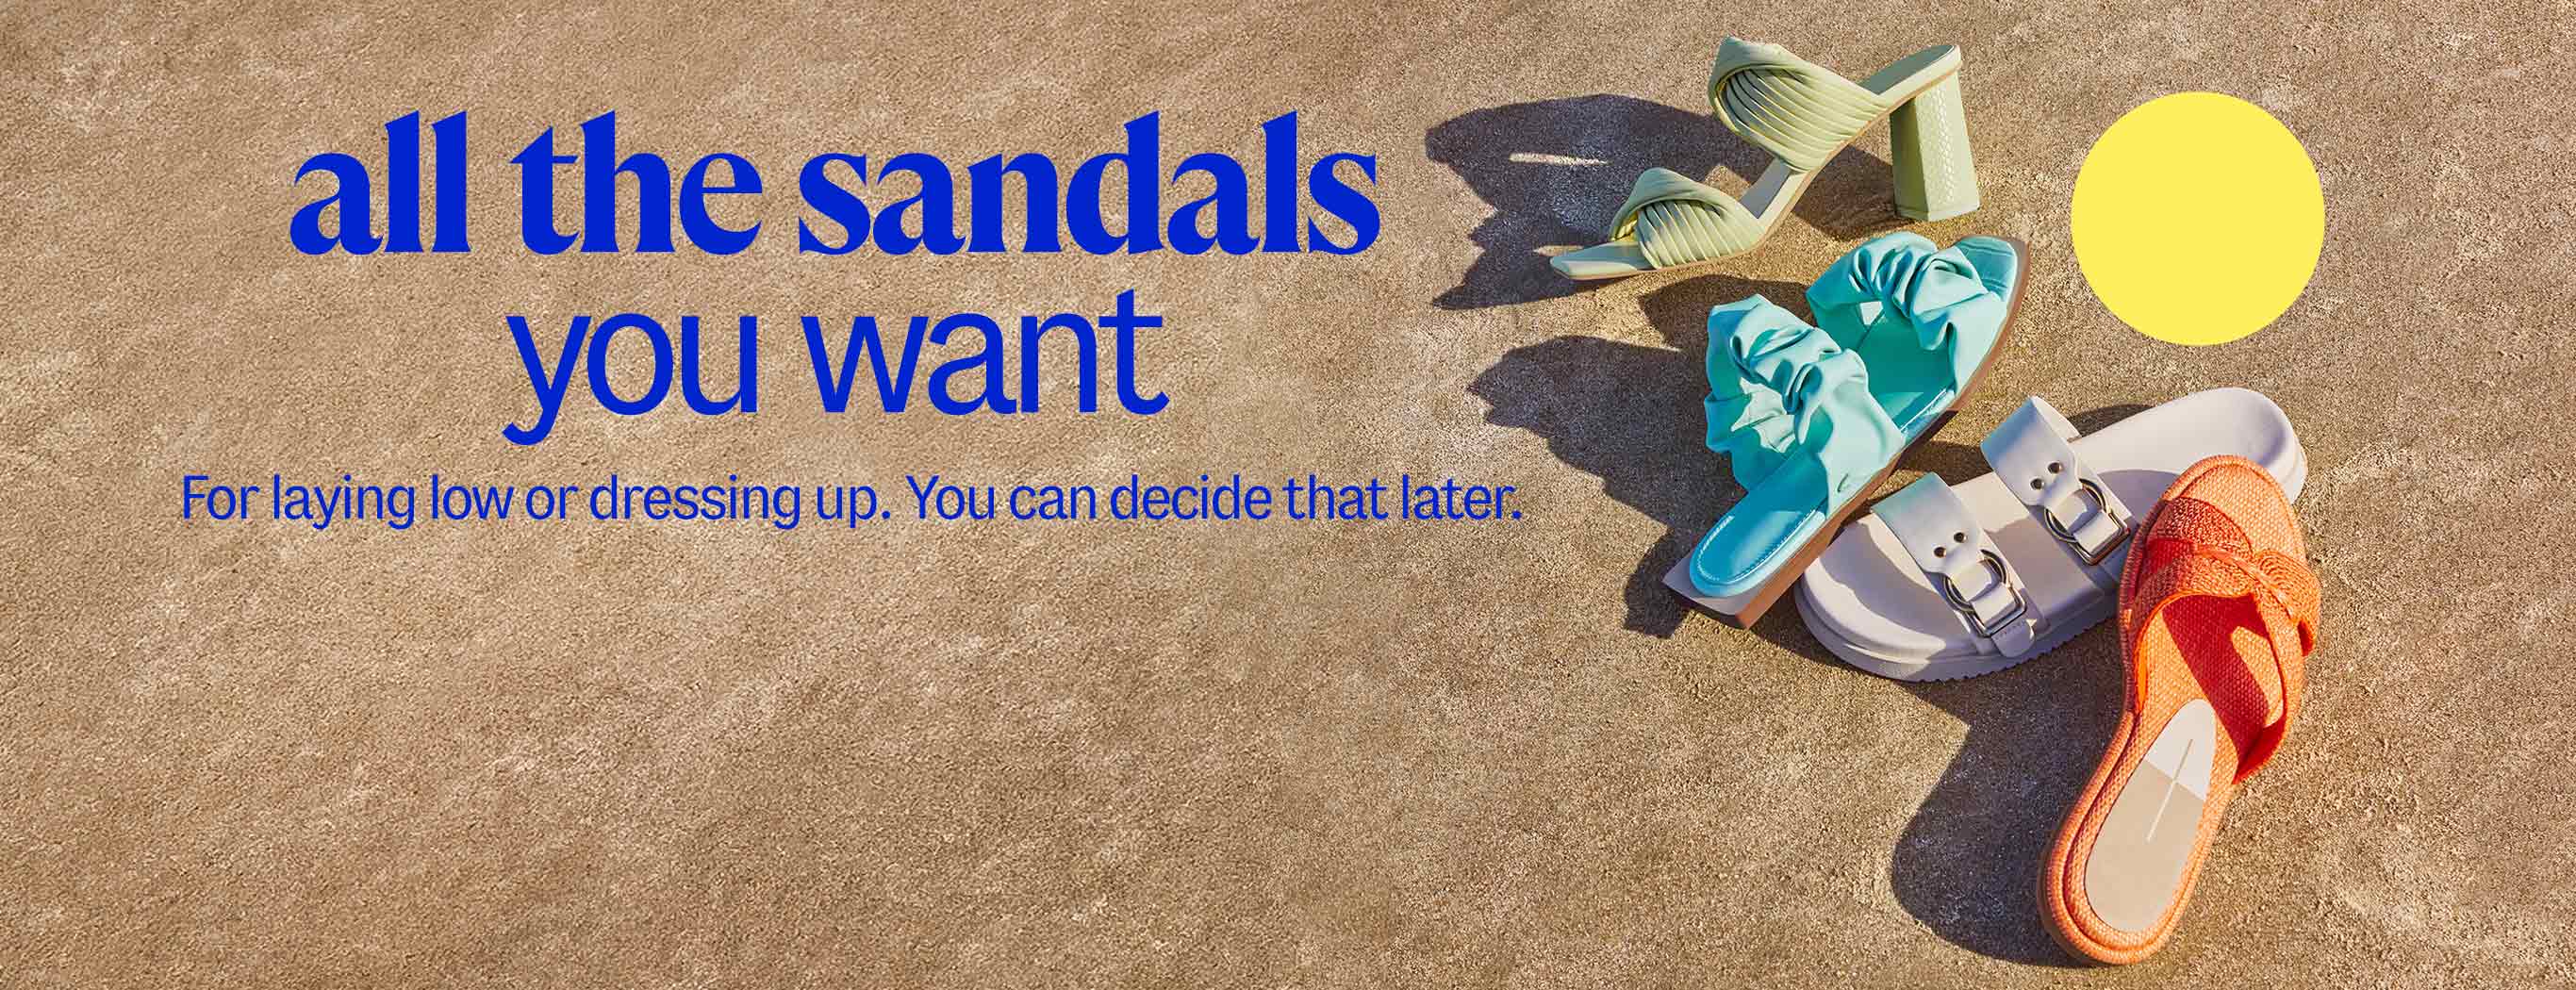 all the sandals you want For laying low or dressing up. You can decide that later.